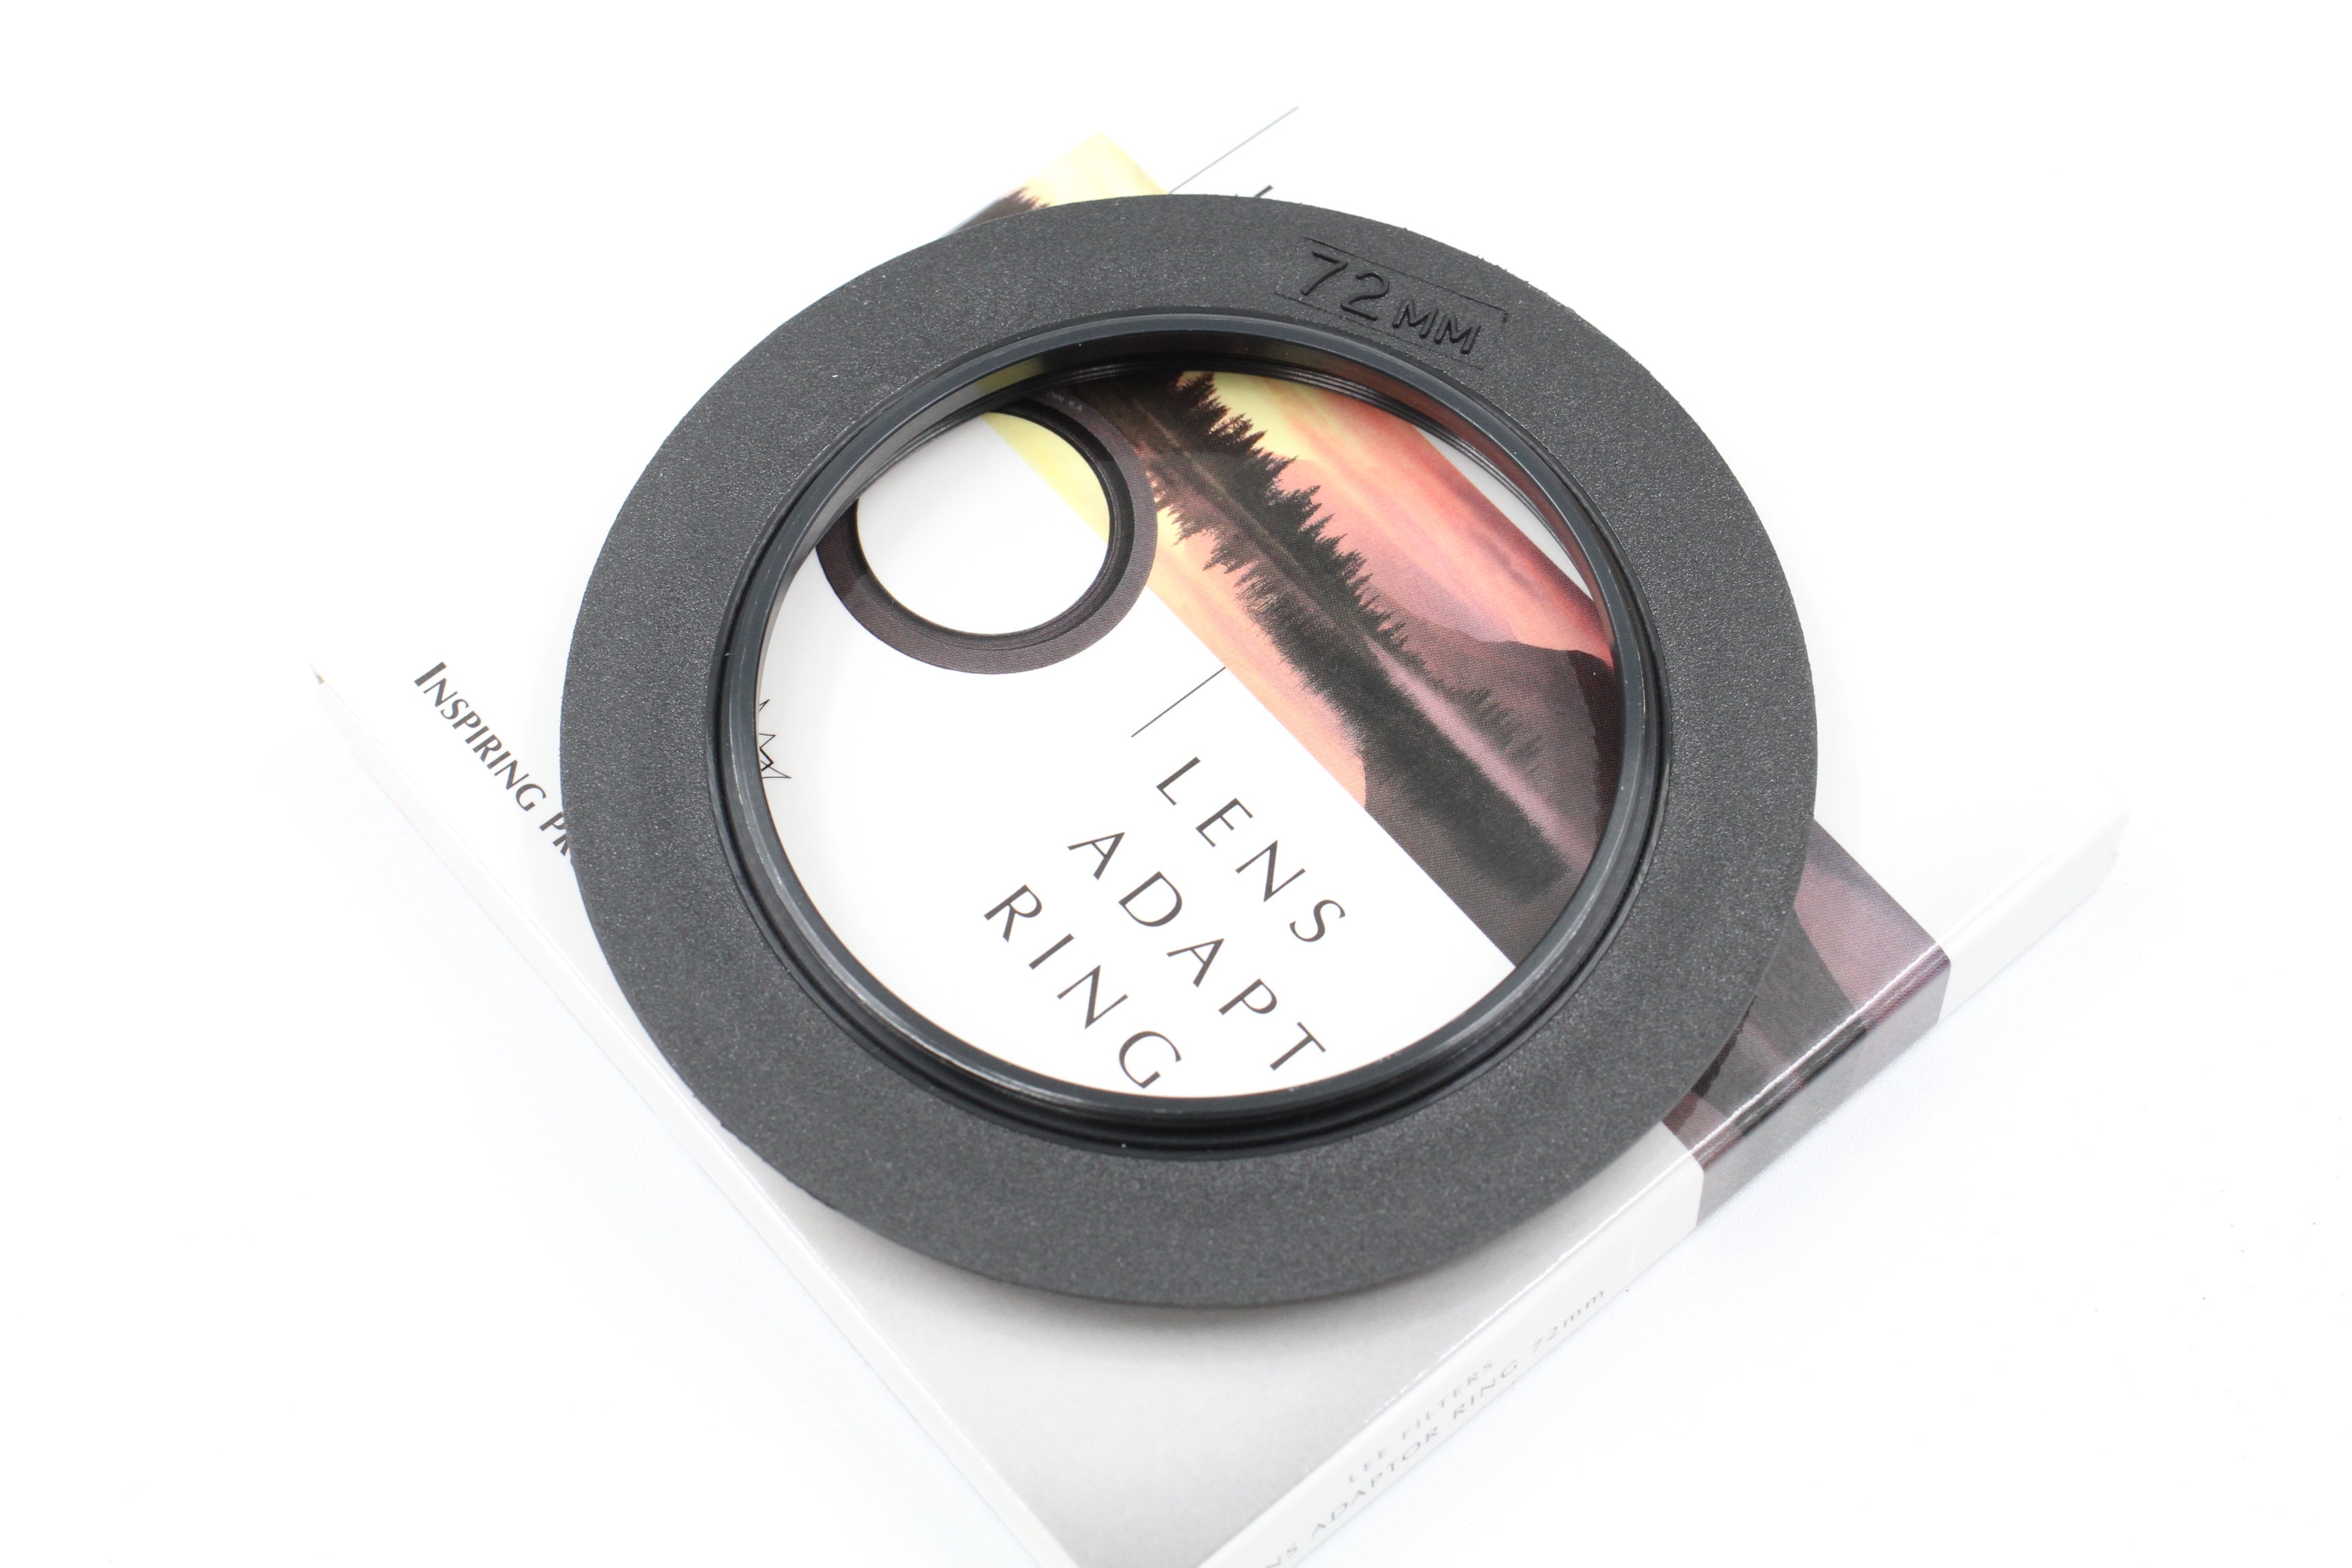 LEE 100 Lens Adapter Ring 72mm, Boxed